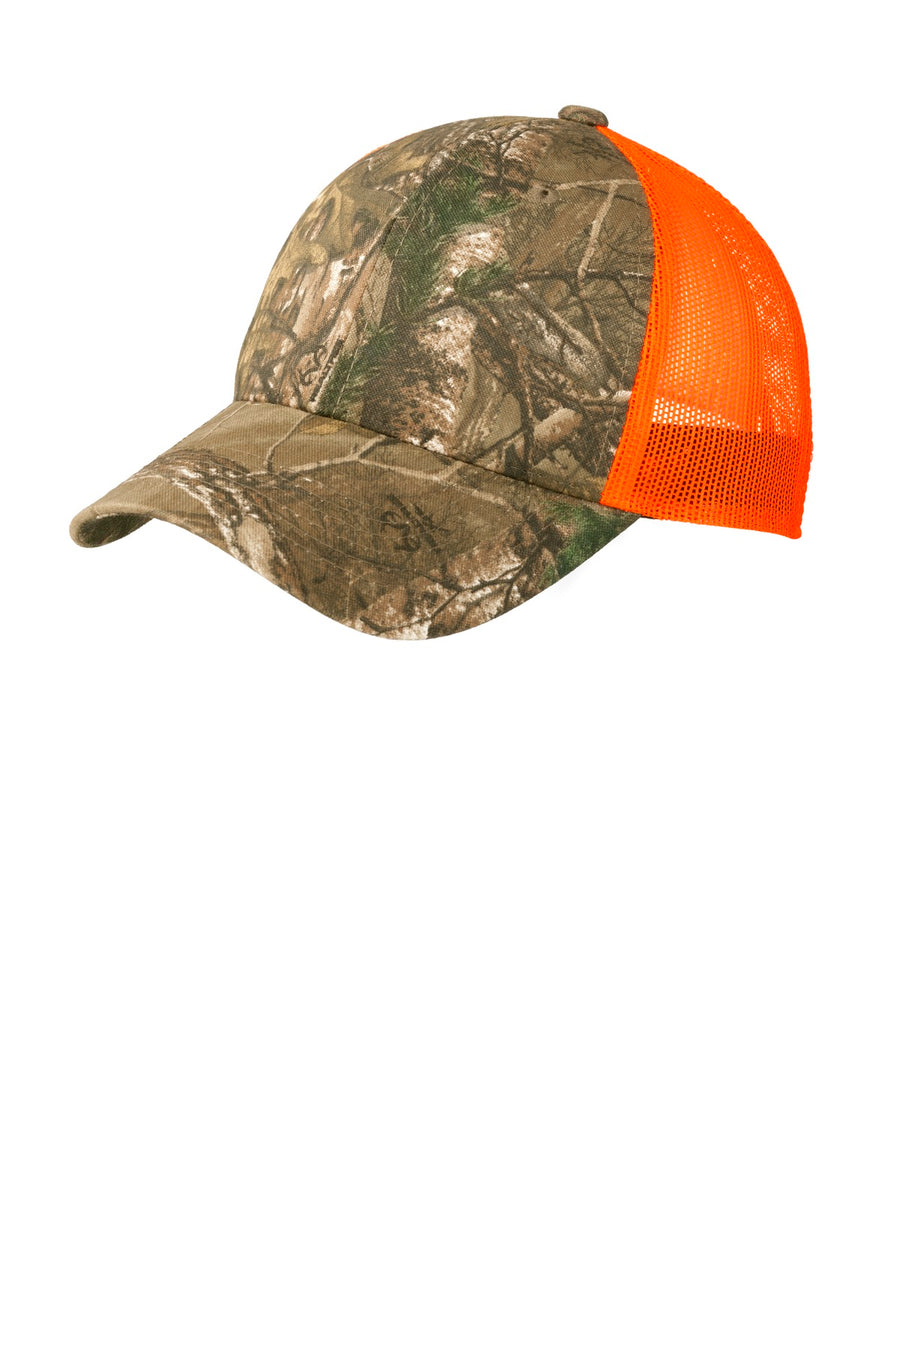 Port Authority Structured Camouflage Mesh Back Cap.